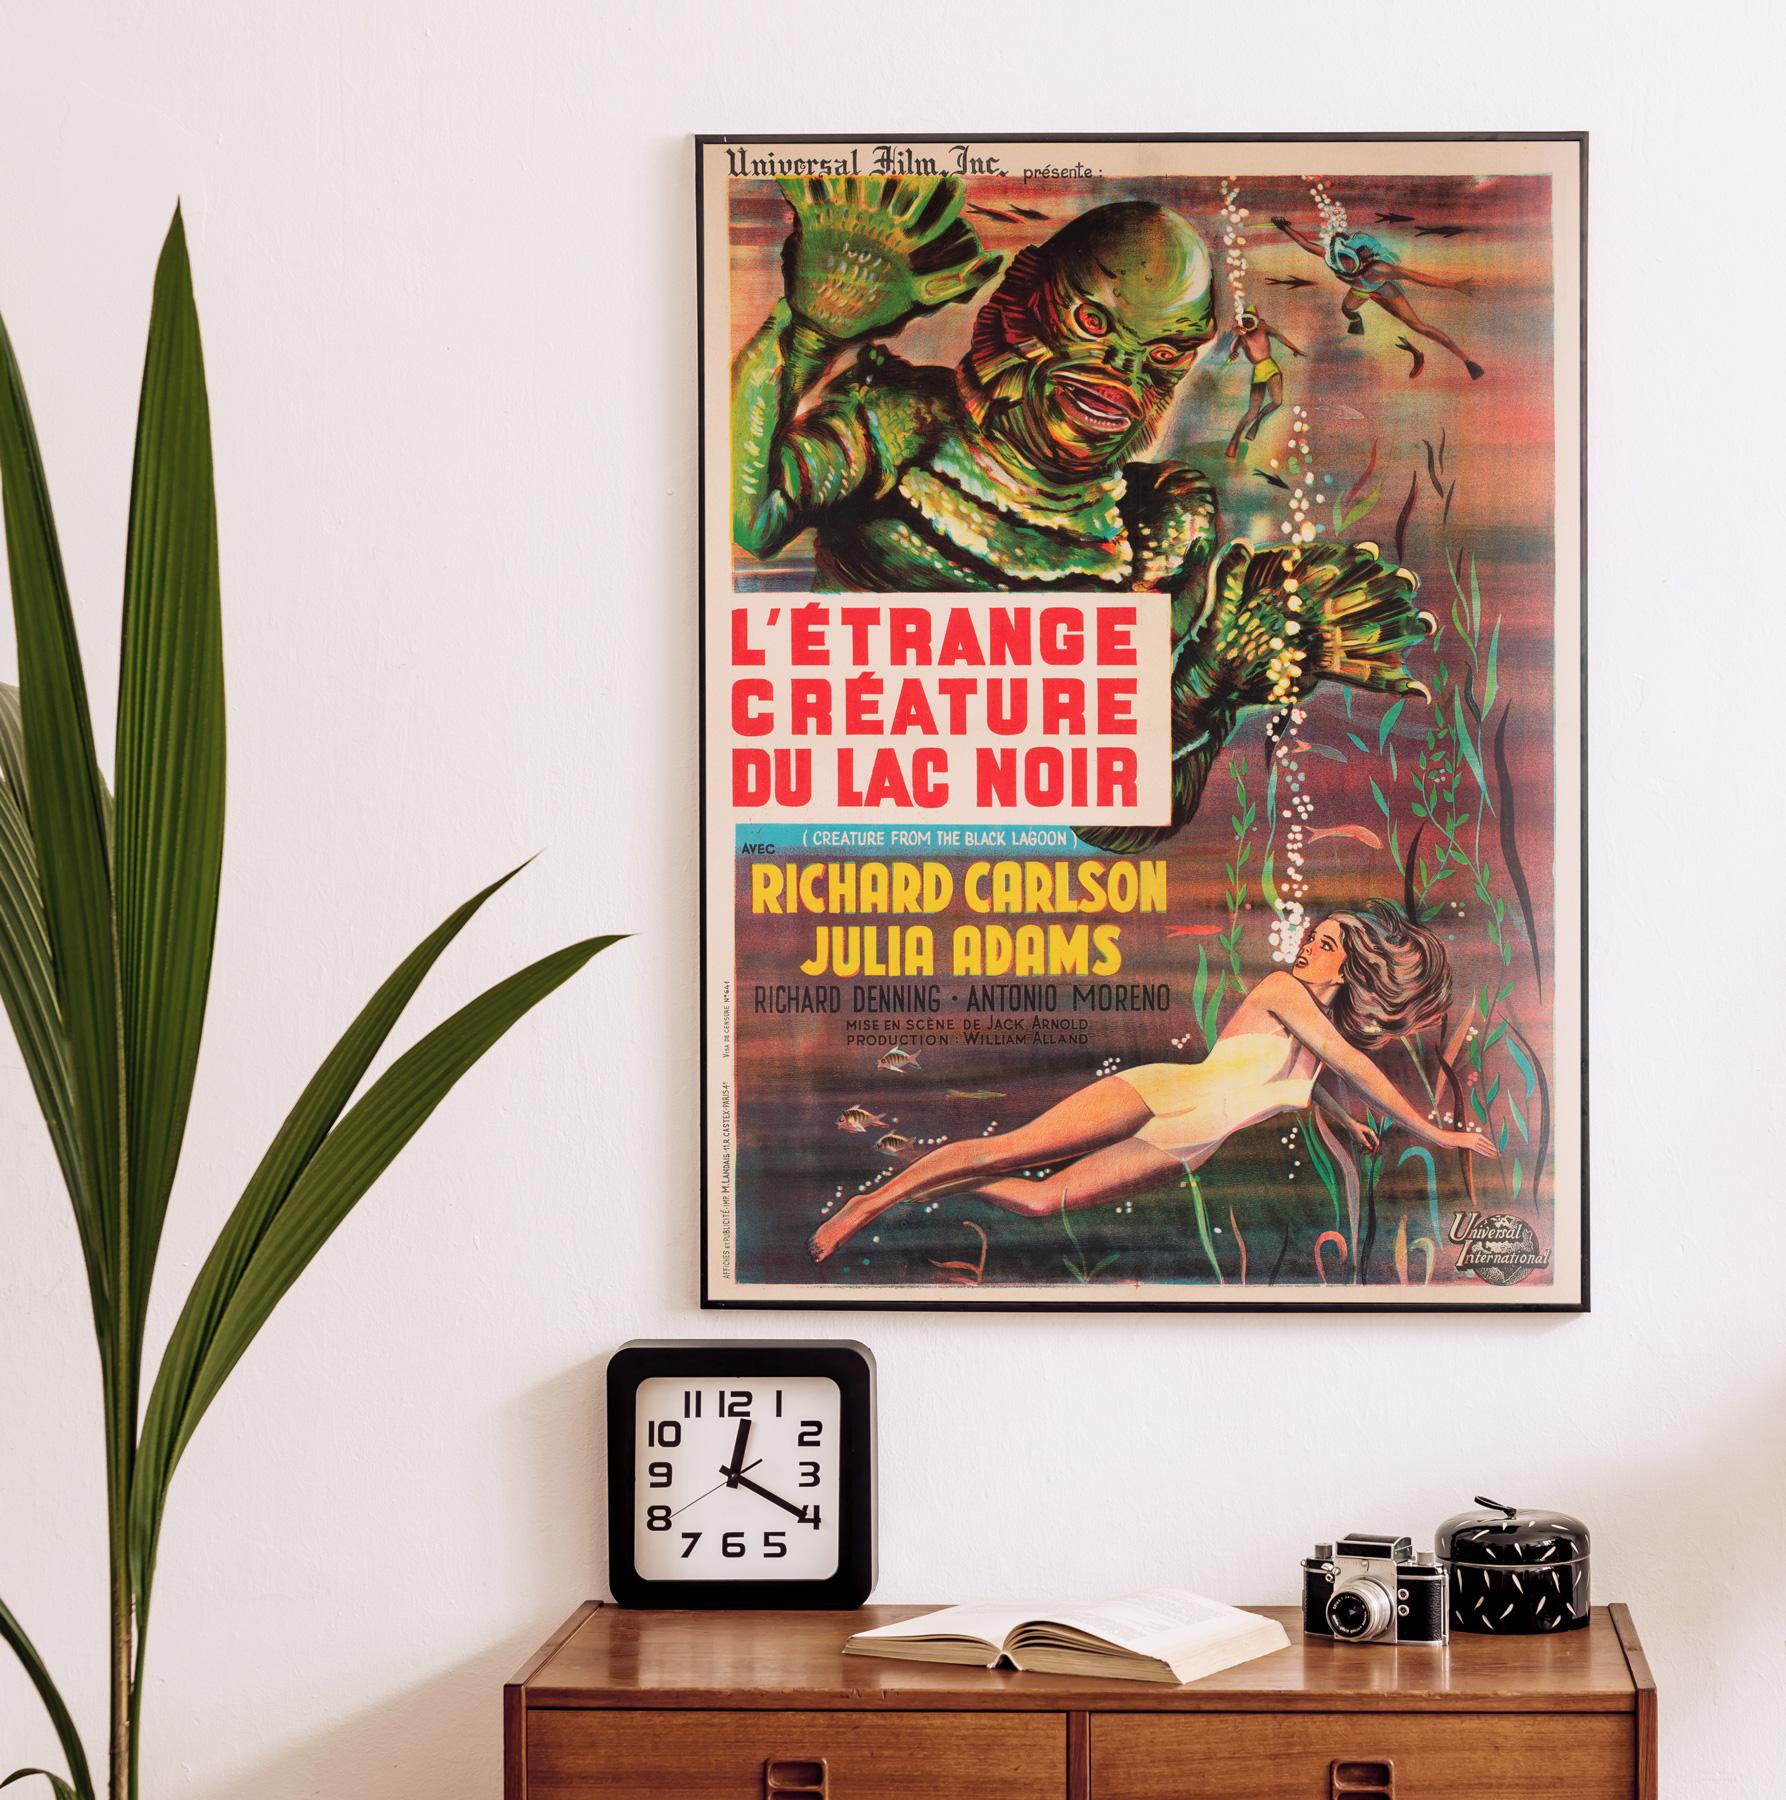 An early 60s re-release French film poster for the 1954 American classic monster movie Creature from the Black Lagoon. The film's plot follows a group of scientists who encounter a piscine amphibious humanoid in the waters of the Amazon.

Fantastic